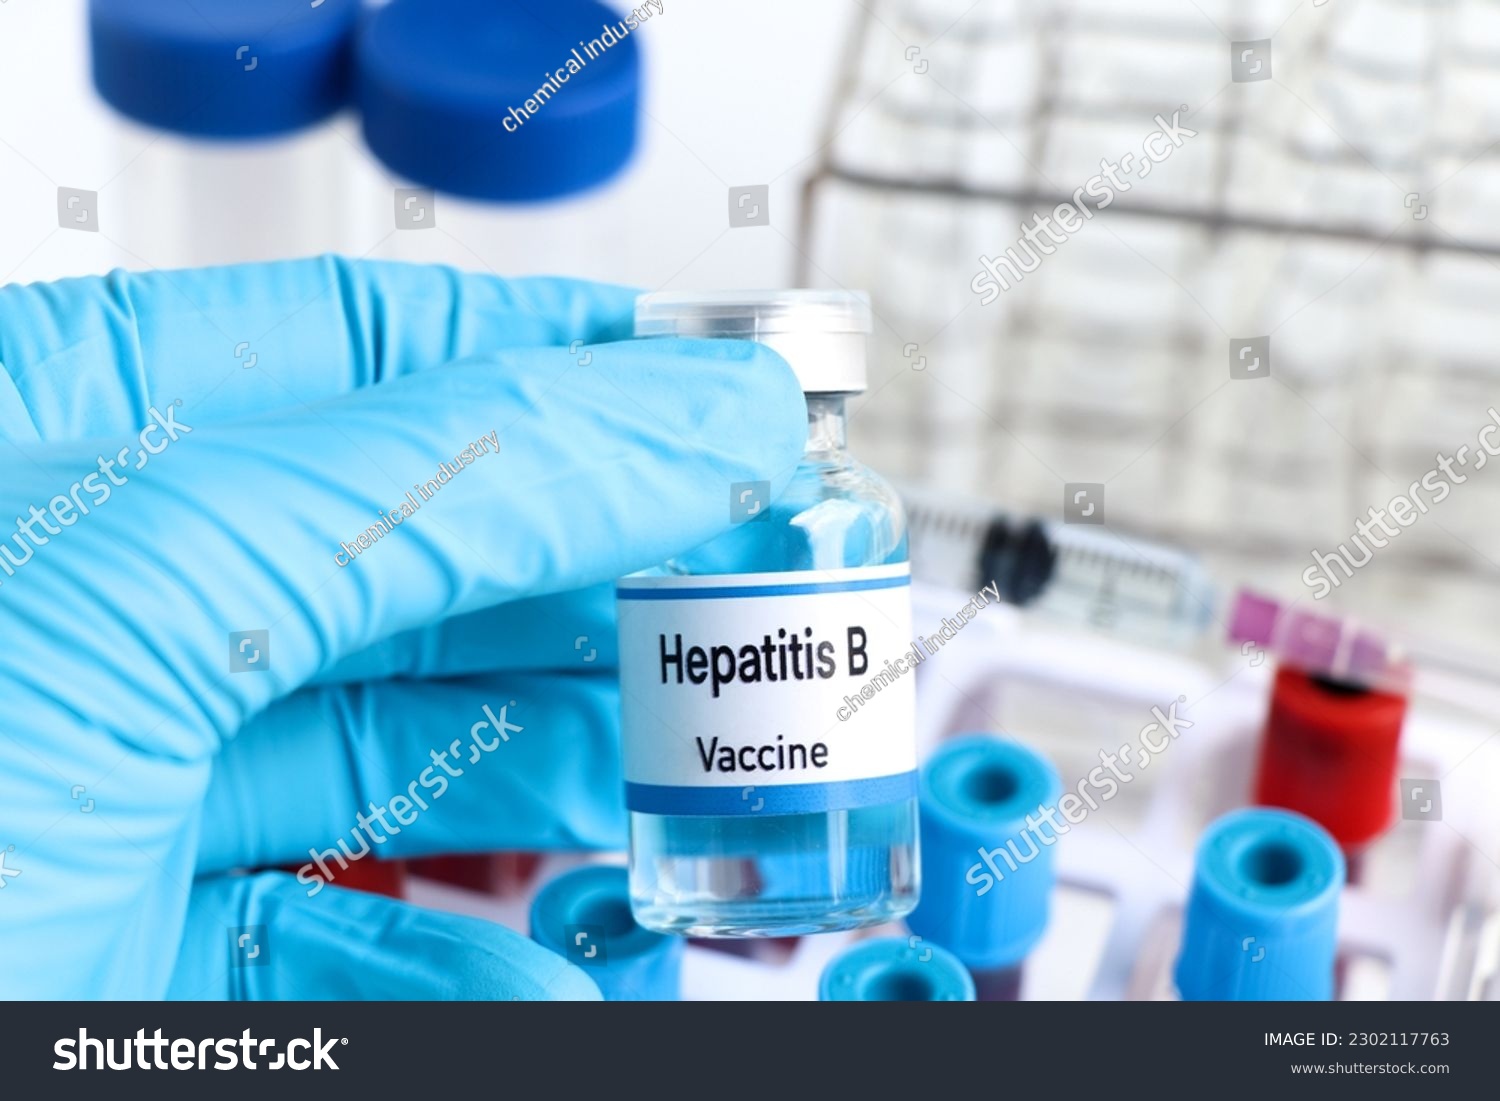 Hepatitis B vaccine in a vial, immunization and treatment of infection, vaccine used for disease prevention #2302117763